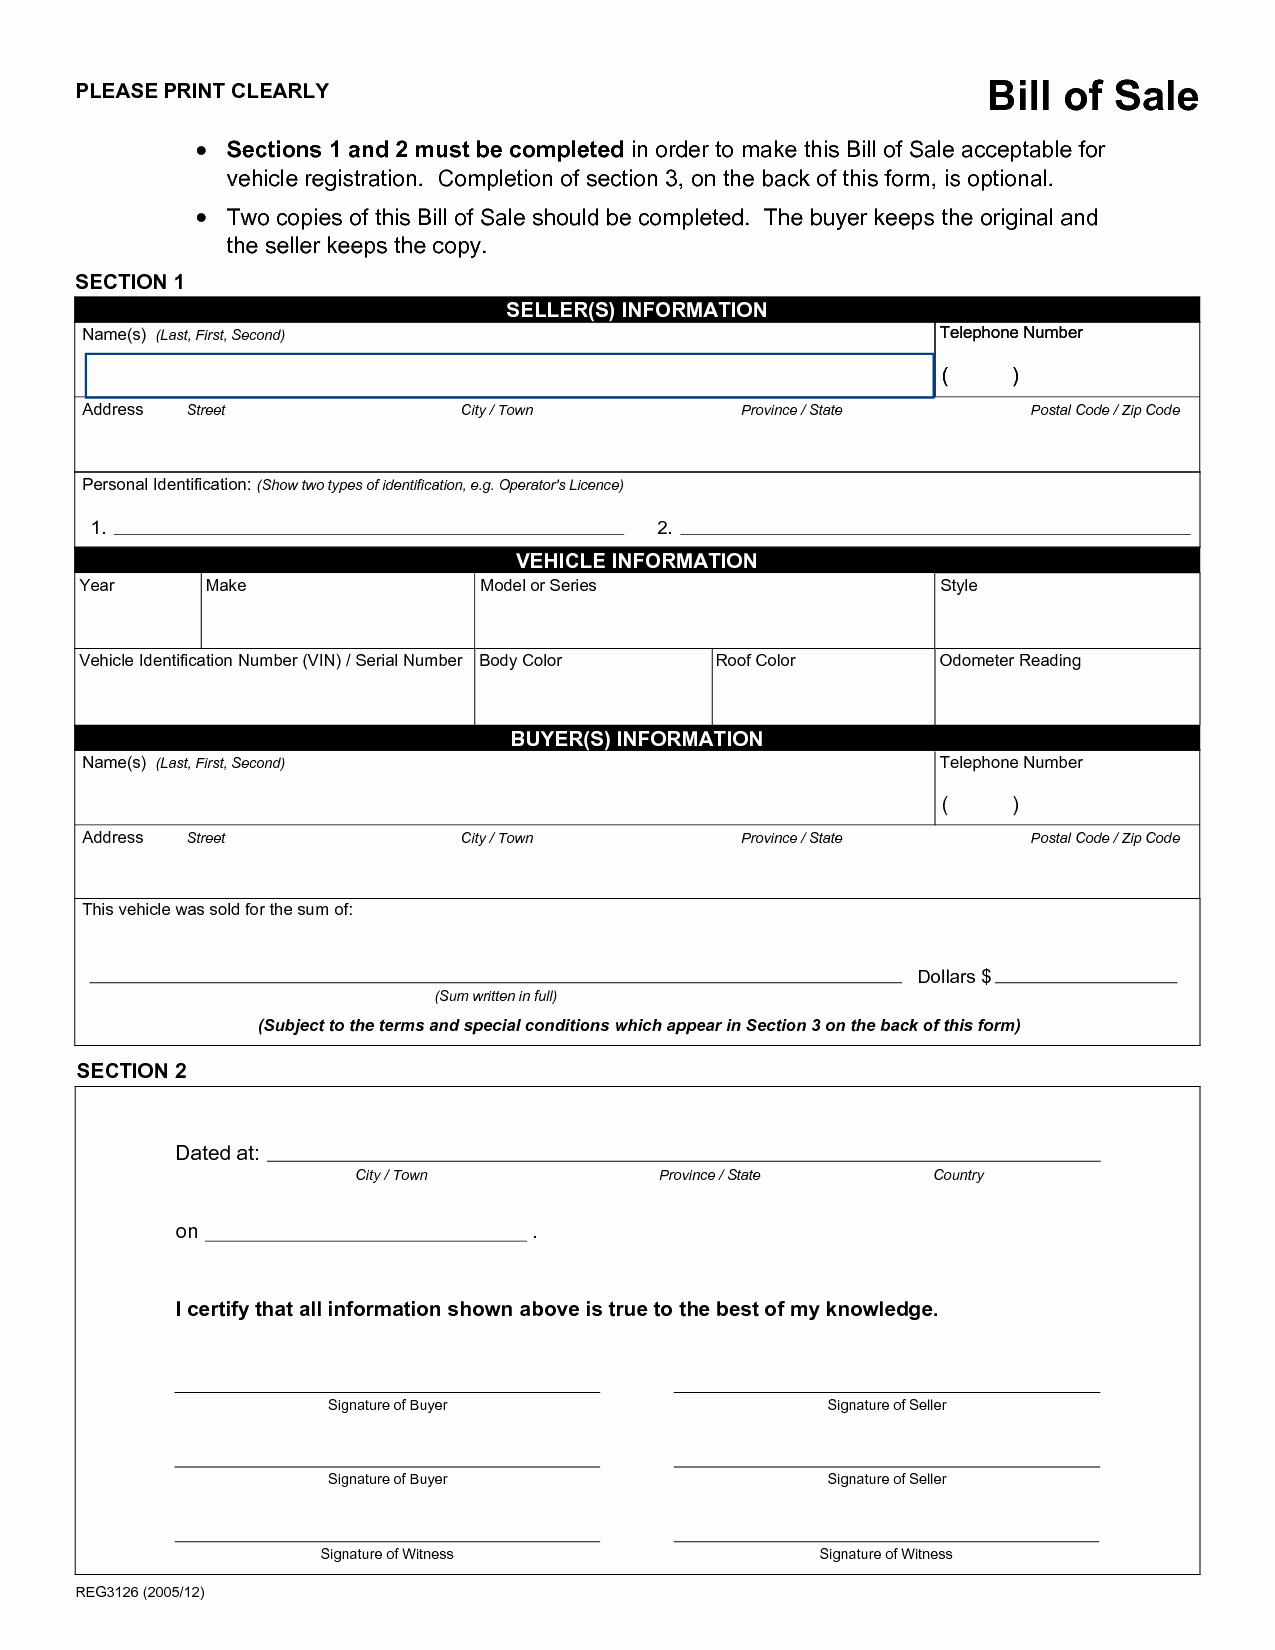 Bill Of Sale Template Ga Lovely Free Printable Rv Bill Of Sale form form Generic